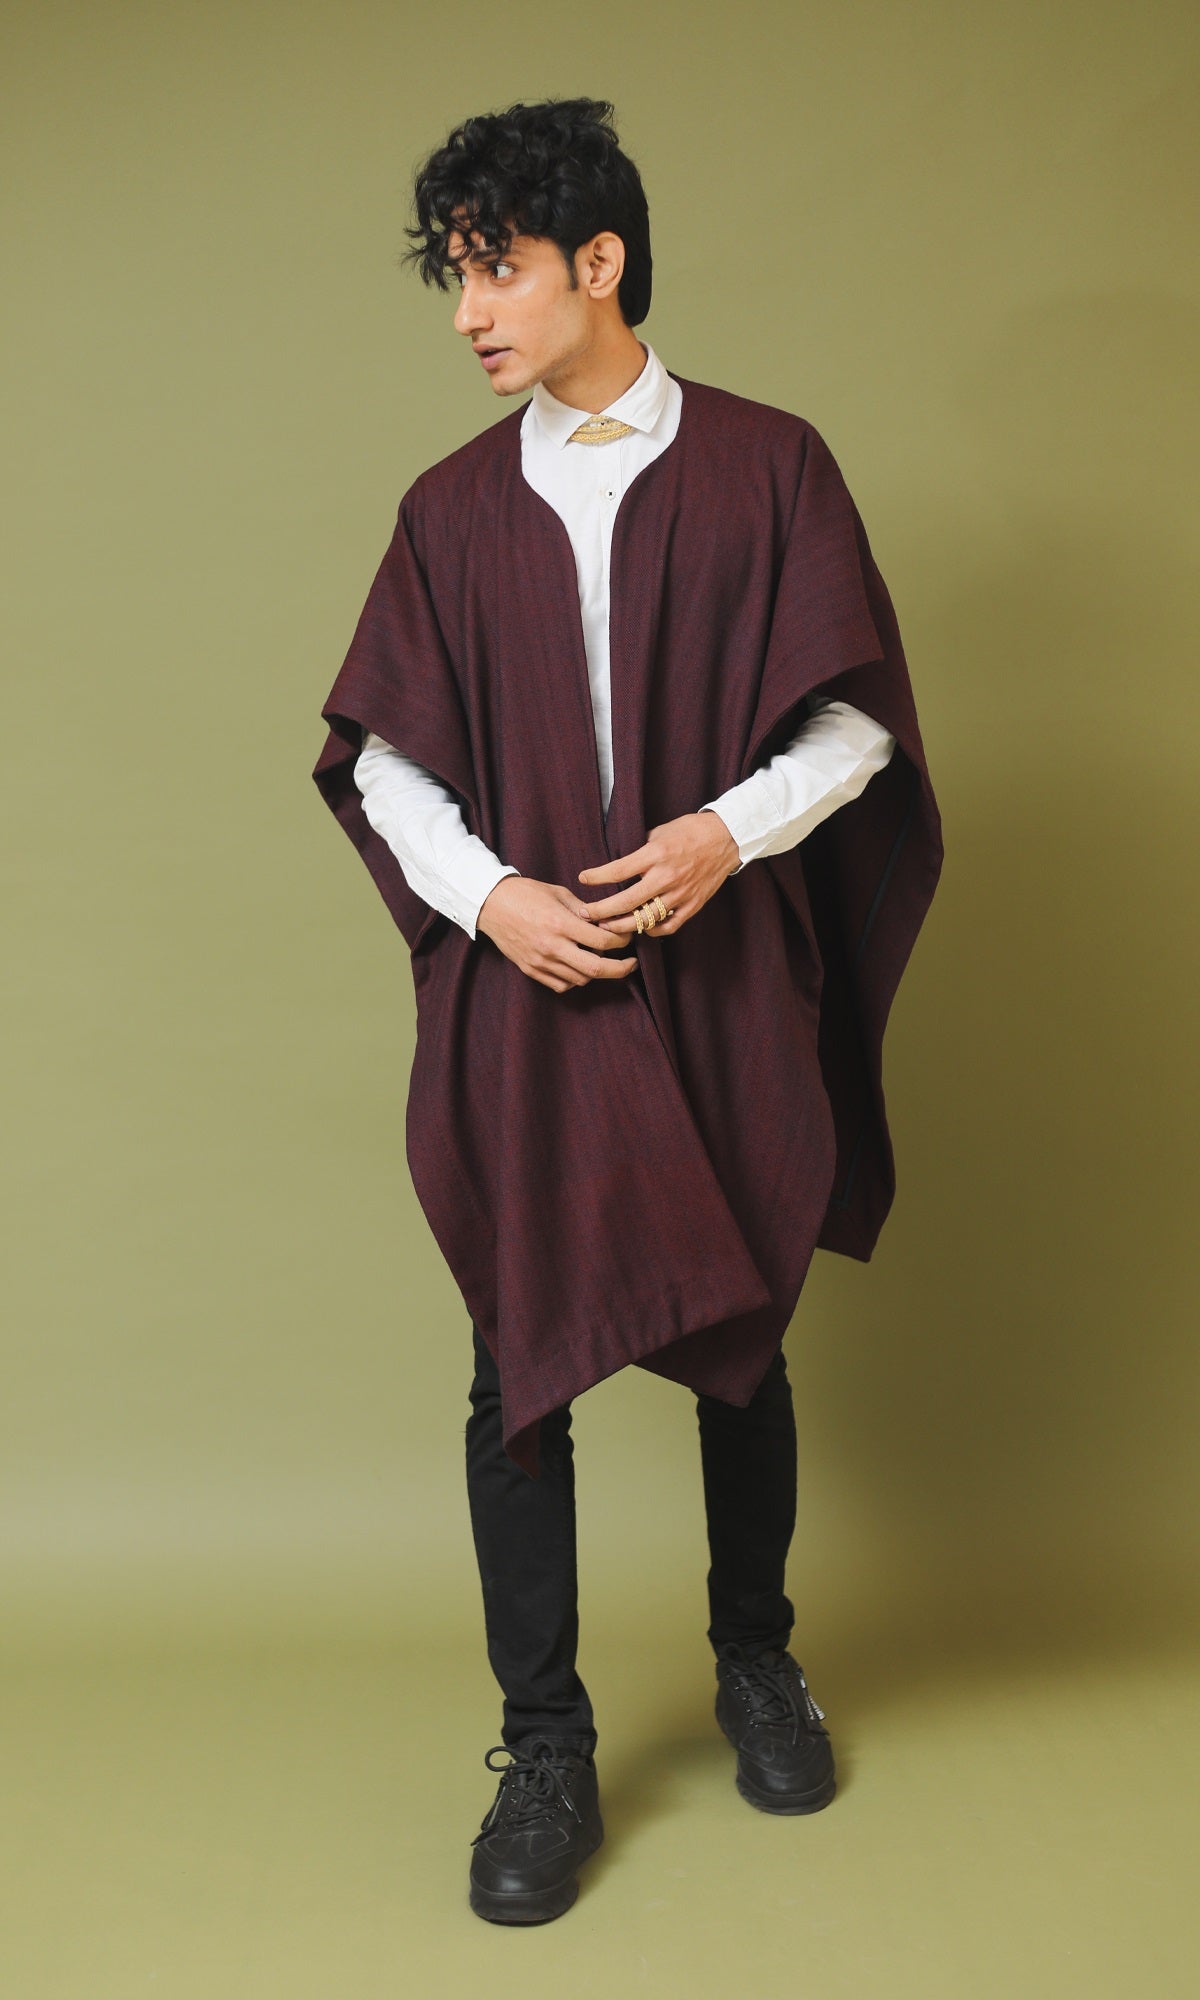 Meher Maroon and Black Handwoven Woollen Cape without Sleeves